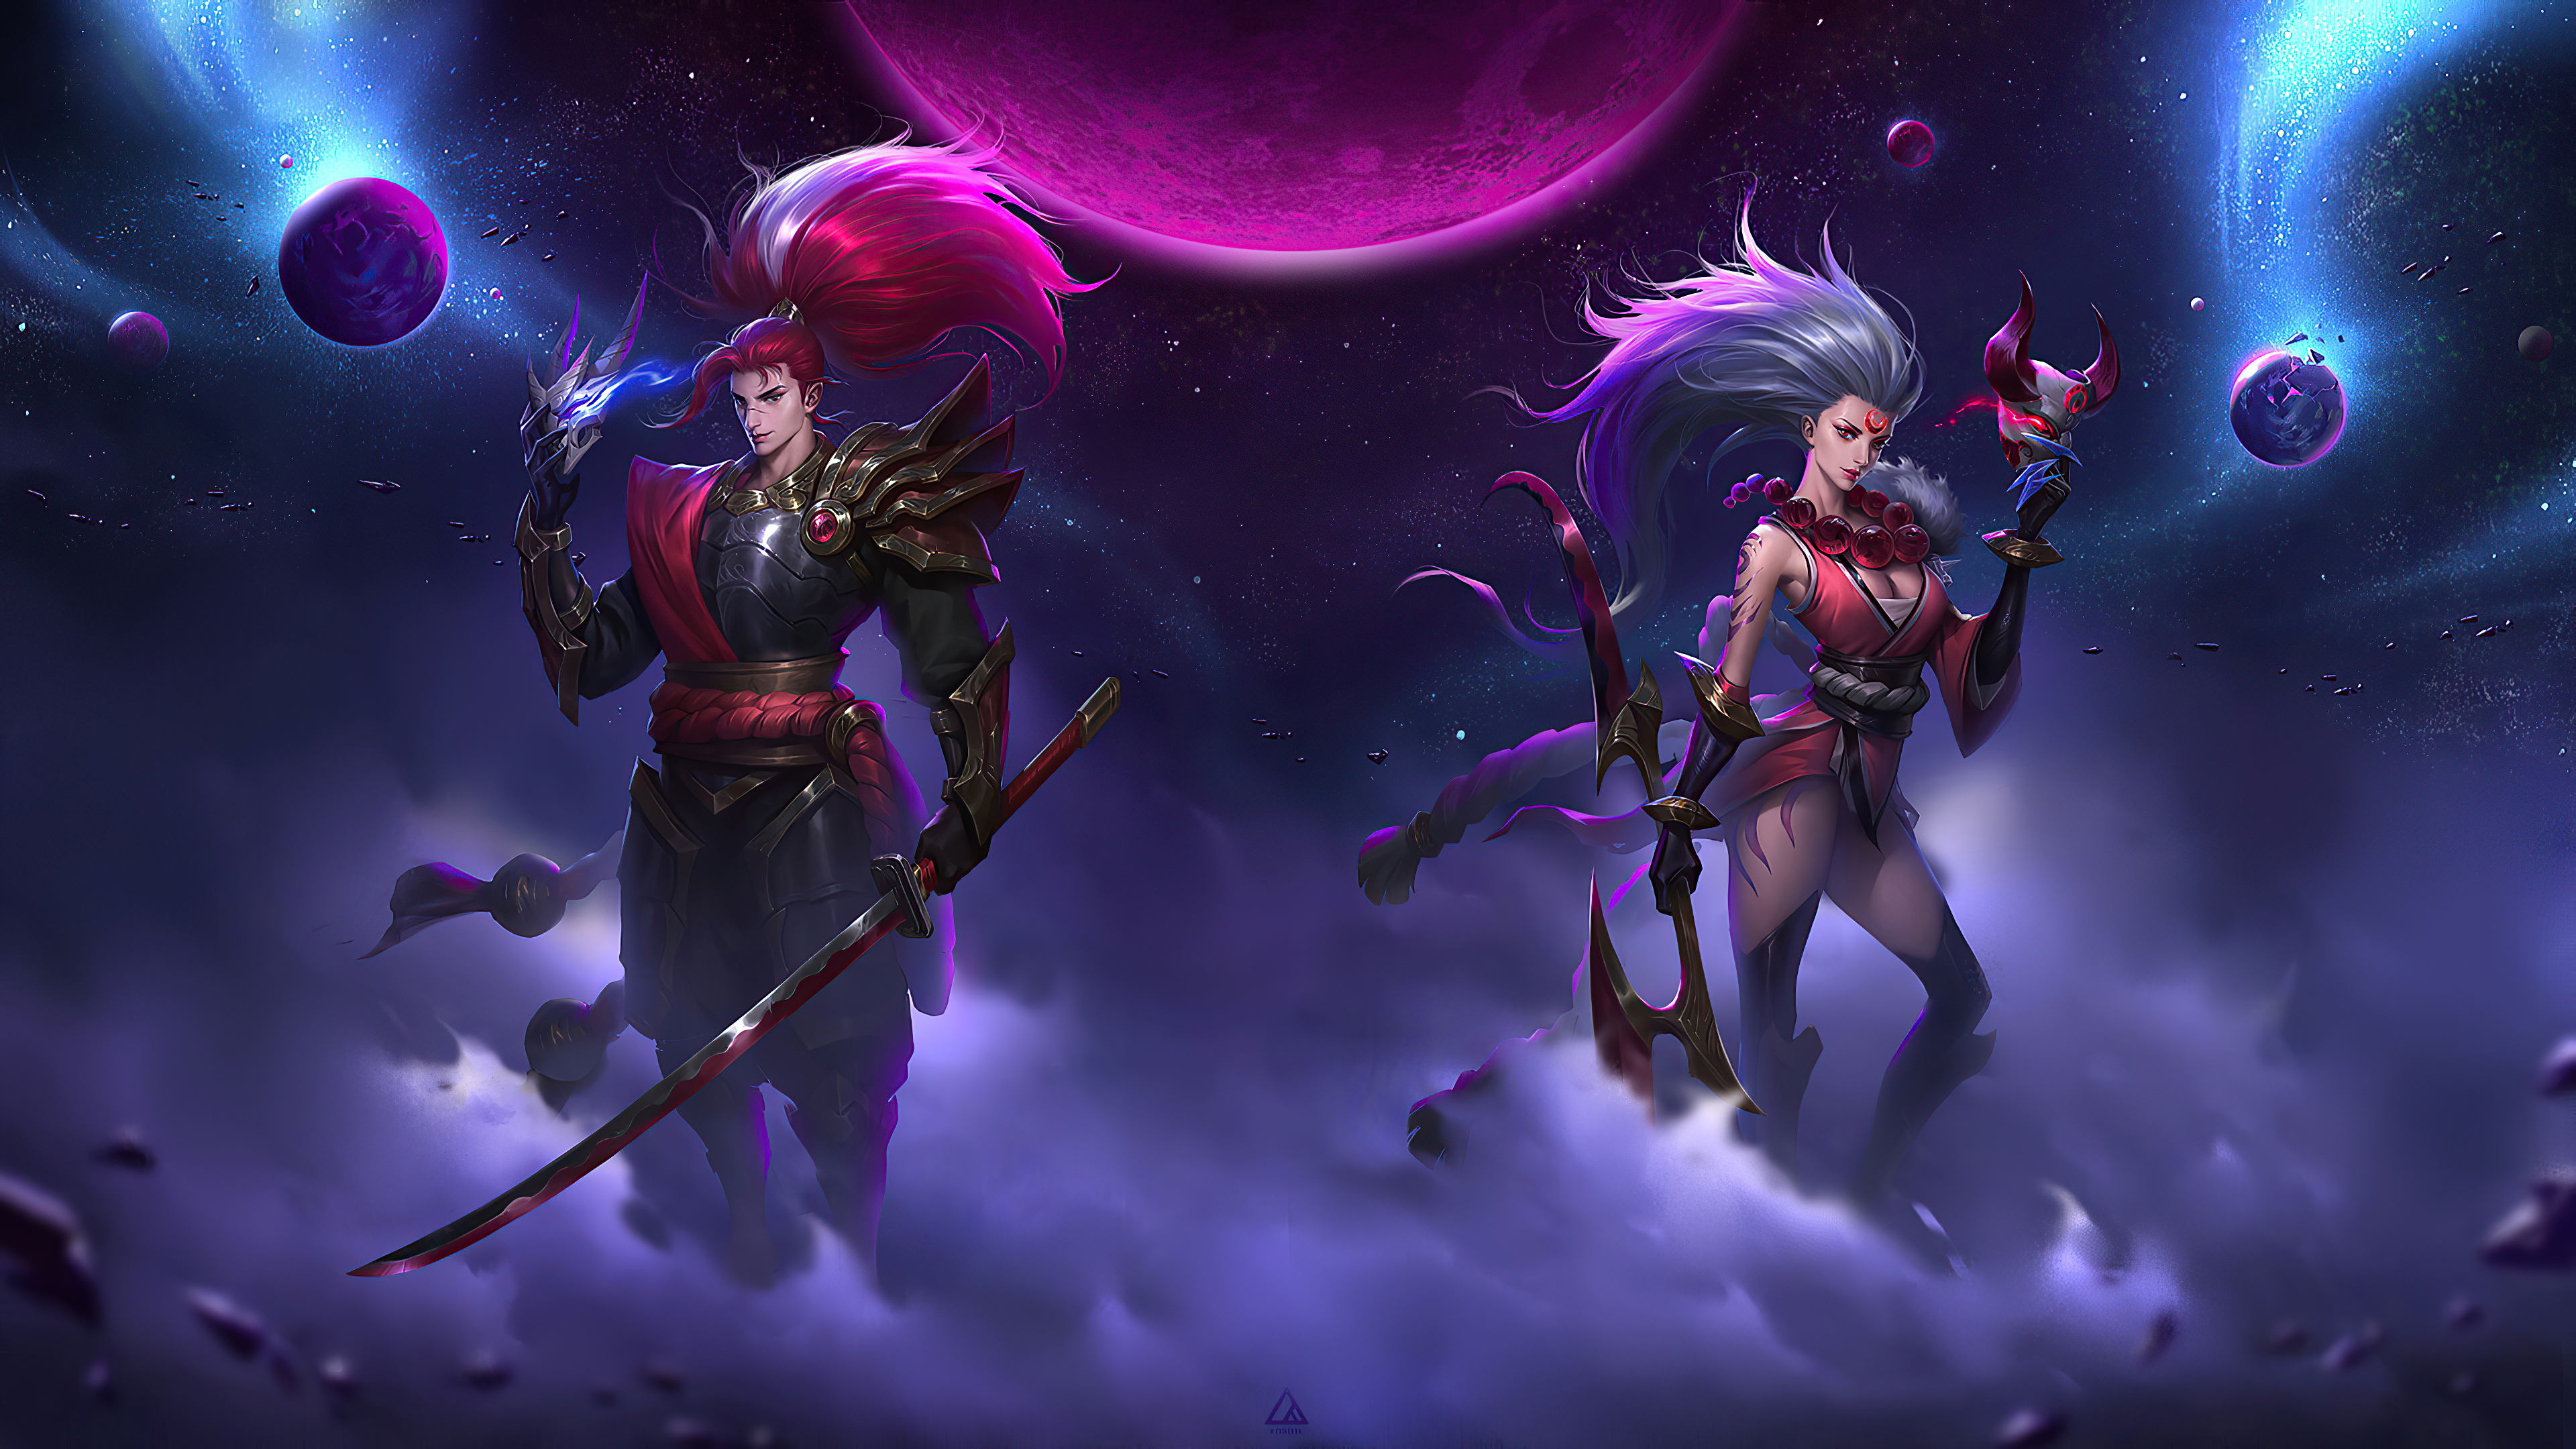 Pin On League Of Legends Online Game Hd 4k Wallpapers - Reverasite